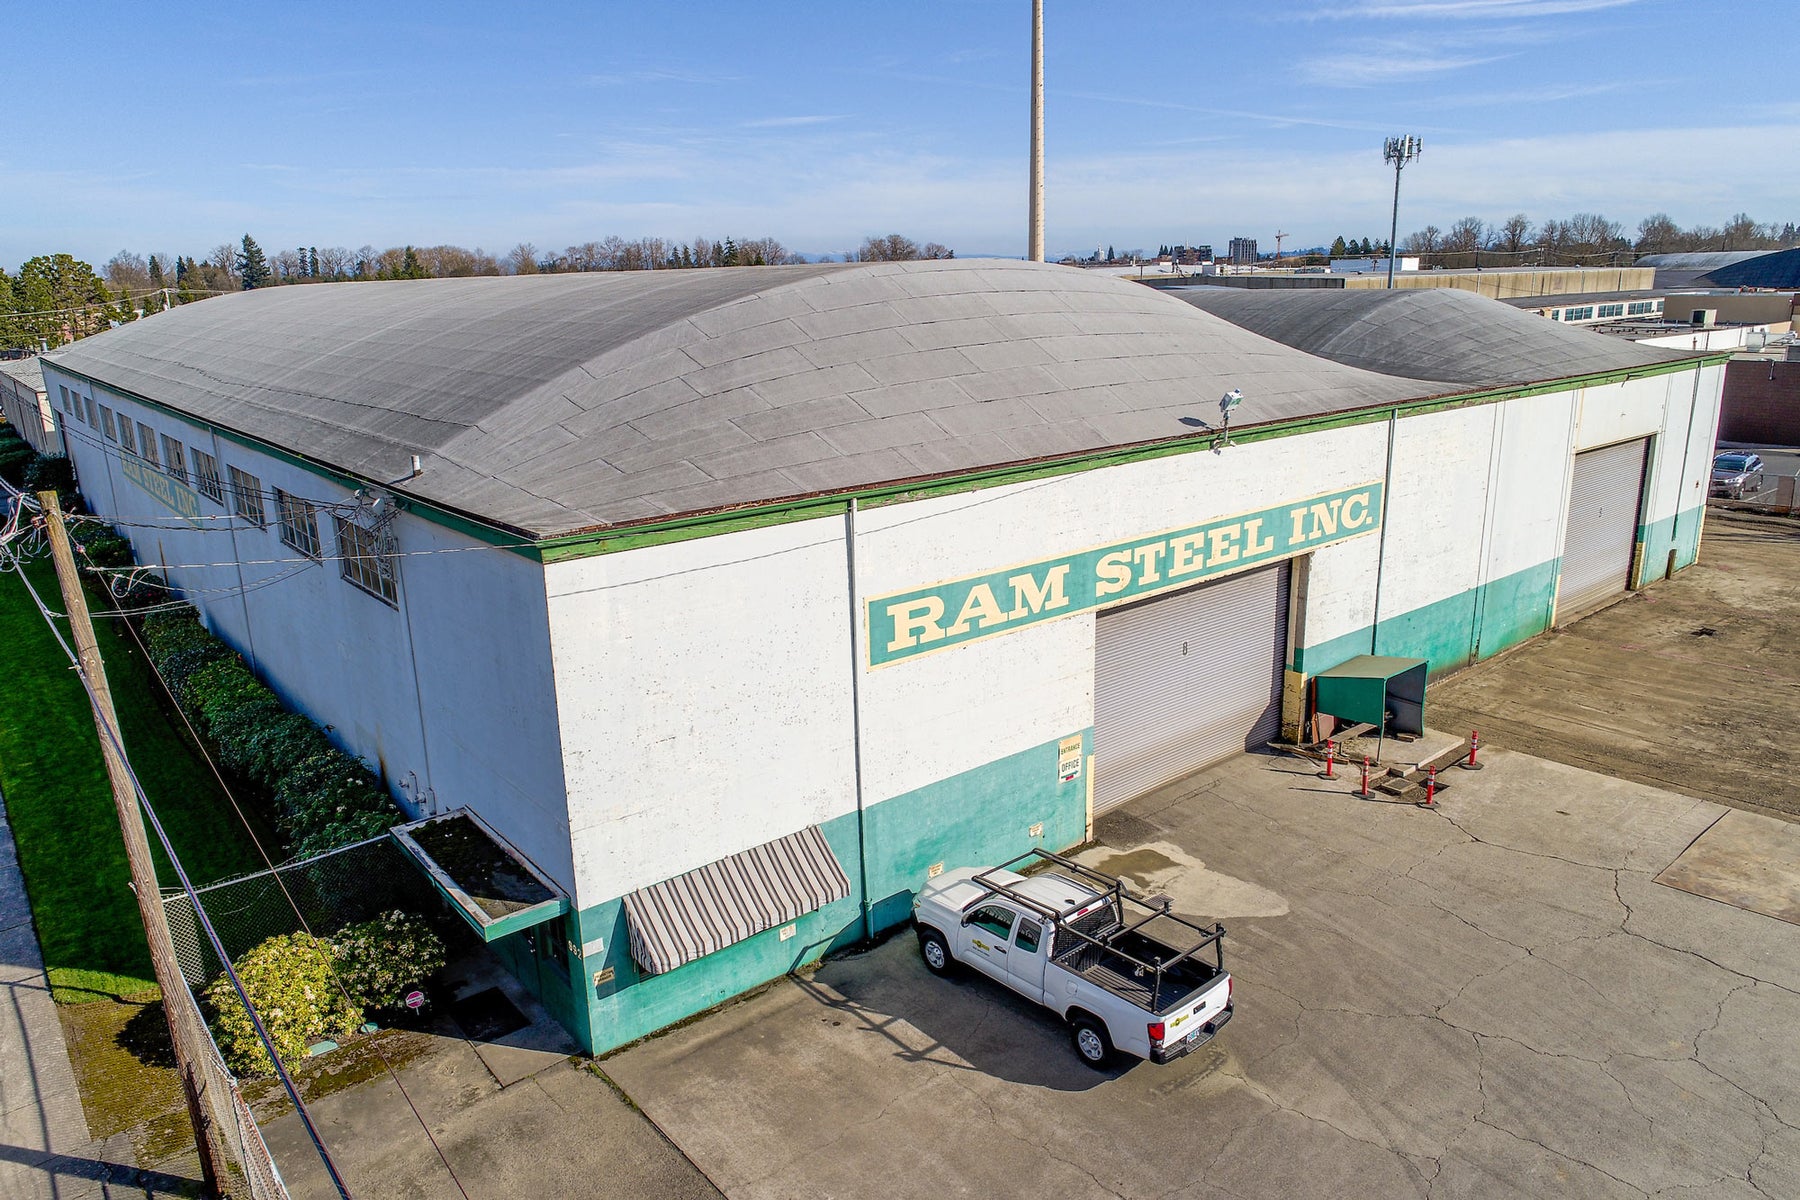 Ram Steelco's Warehouse. We offer a complete line of steel, aluminum, stainless and other metal products. Plus processing capabilities that include laser cutting, plasma burning, forming, shearing, saw cutting and rolling.